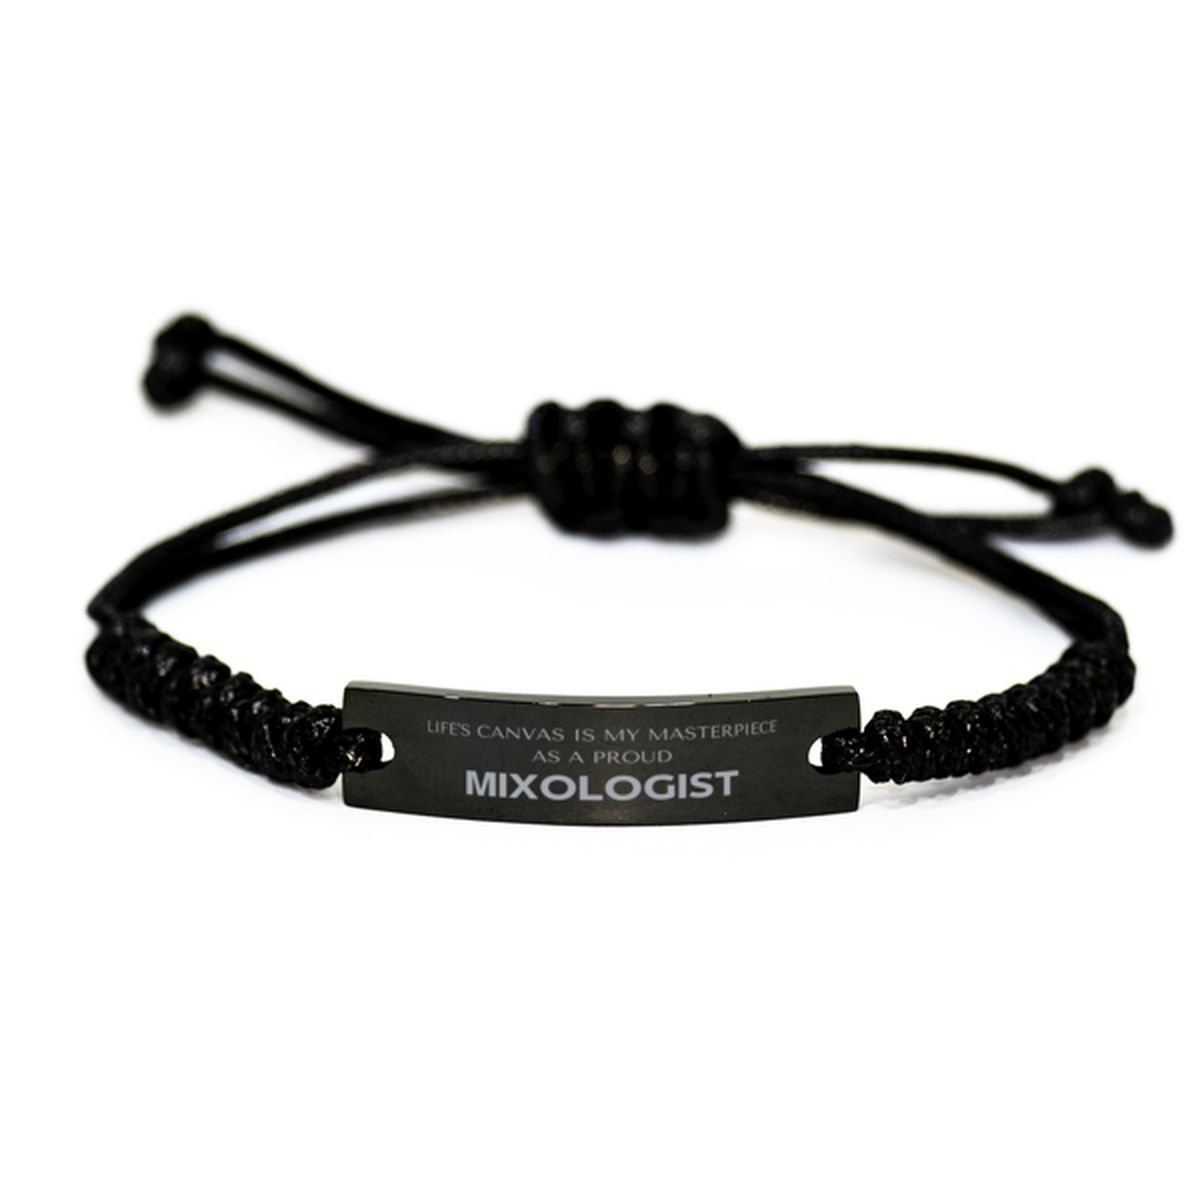 Proud Mixologist Gifts, Life's canvas is my masterpiece, Epic Birthday Christmas Unique Black Rope Bracelet For Mixologist, Coworkers, Men, Women, Friends